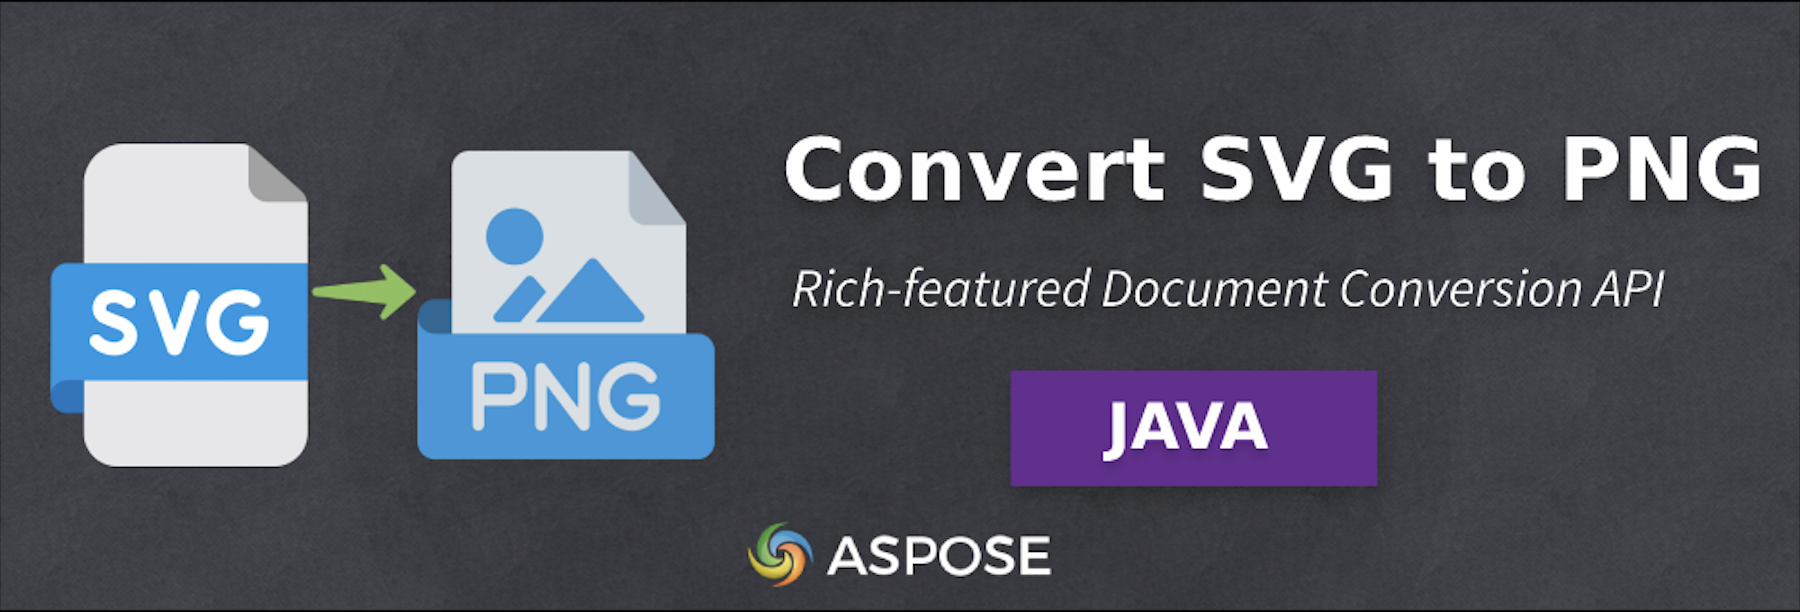 Convert SVG to PNG in Java - Image Conversion Software